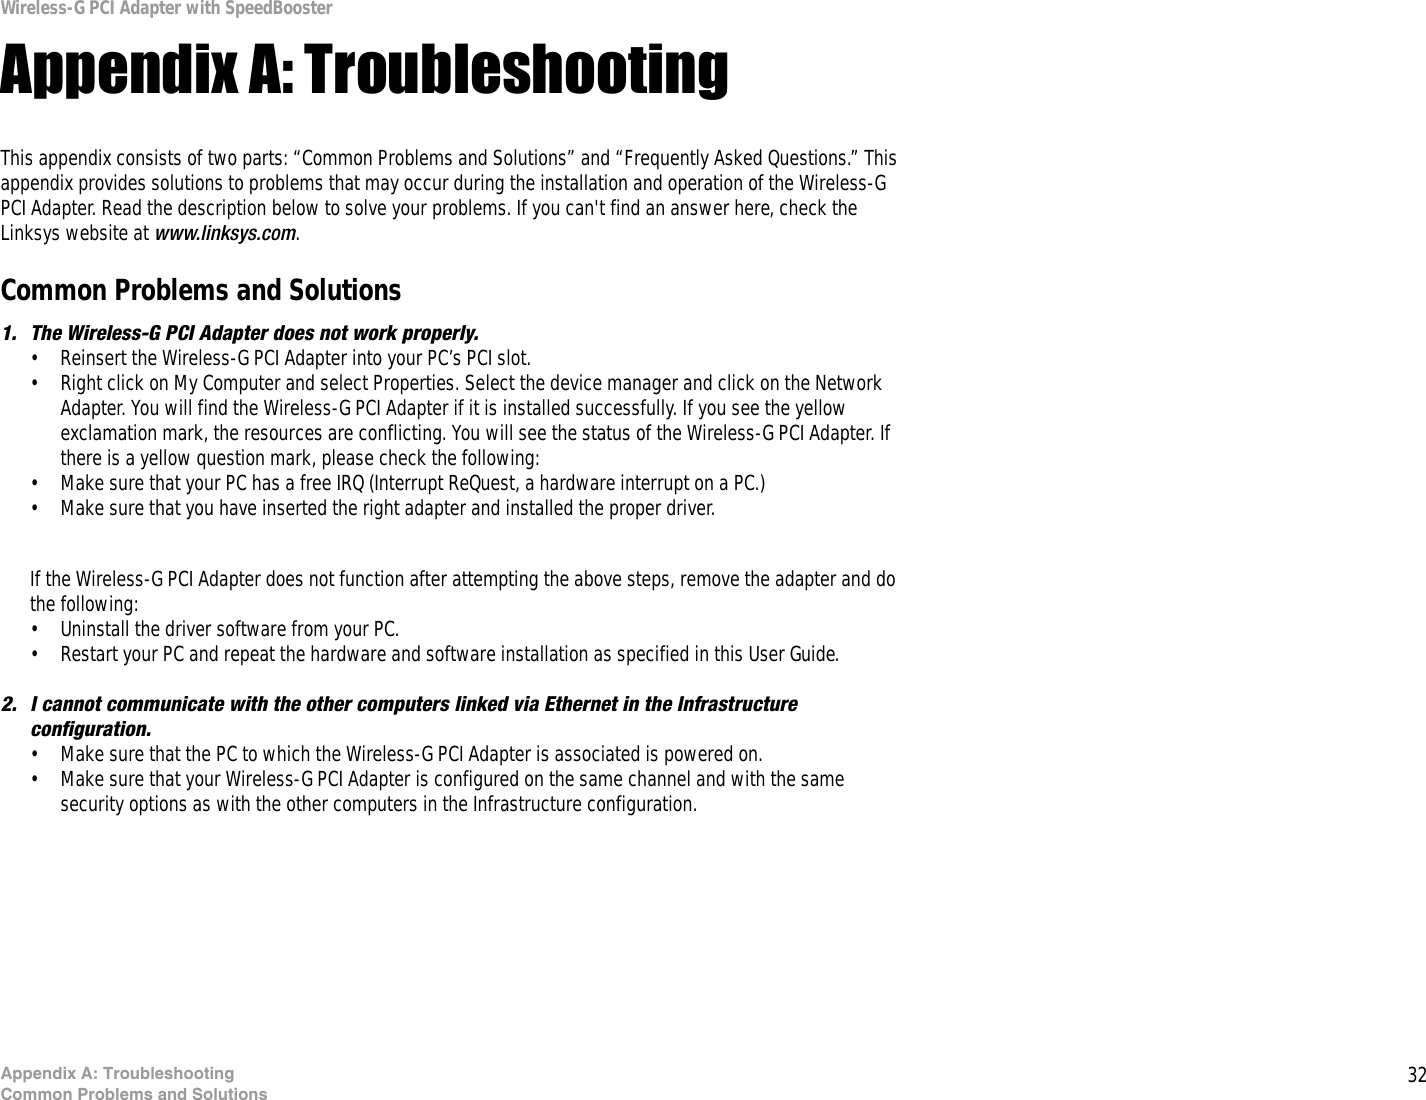 32Appendix A: TroubleshootingCommon Problems and SolutionsWireless-G PCI Adapter with SpeedBoosterAppendix A: TroubleshootingThis appendix consists of two parts: “Common Problems and Solutions” and “Frequently Asked Questions.” This appendix provides solutions to problems that may occur during the installation and operation of the Wireless-G PCI Adapter. Read the description below to solve your problems. If you can&apos;t find an answer here, check the Linksys website at www.linksys.com.Common Problems and Solutions1. The Wireless-G PCI Adapter does not work properly.• Reinsert the Wireless-G PCI Adapter into your PC’s PCI slot.• Right click on My Computer and select Properties. Select the device manager and click on the Network Adapter. You will find the Wireless-G PCI Adapter if it is installed successfully. If you see the yellow exclamation mark, the resources are conflicting. You will see the status of the Wireless-G PCI Adapter. If there is a yellow question mark, please check the following:• Make sure that your PC has a free IRQ (Interrupt ReQuest, a hardware interrupt on a PC.) • Make sure that you have inserted the right adapter and installed the proper driver.If the Wireless-G PCI Adapter does not function after attempting the above steps, remove the adapter and do the following:• Uninstall the driver software from your PC.• Restart your PC and repeat the hardware and software installation as specified in this User Guide.2. I cannot communicate with the other computers linked via Ethernet in the Infrastructure configuration.• Make sure that the PC to which the Wireless-G PCI Adapter is associated is powered on.• Make sure that your Wireless-G PCI Adapter is configured on the same channel and with the same security options as with the other computers in the Infrastructure configuration. 